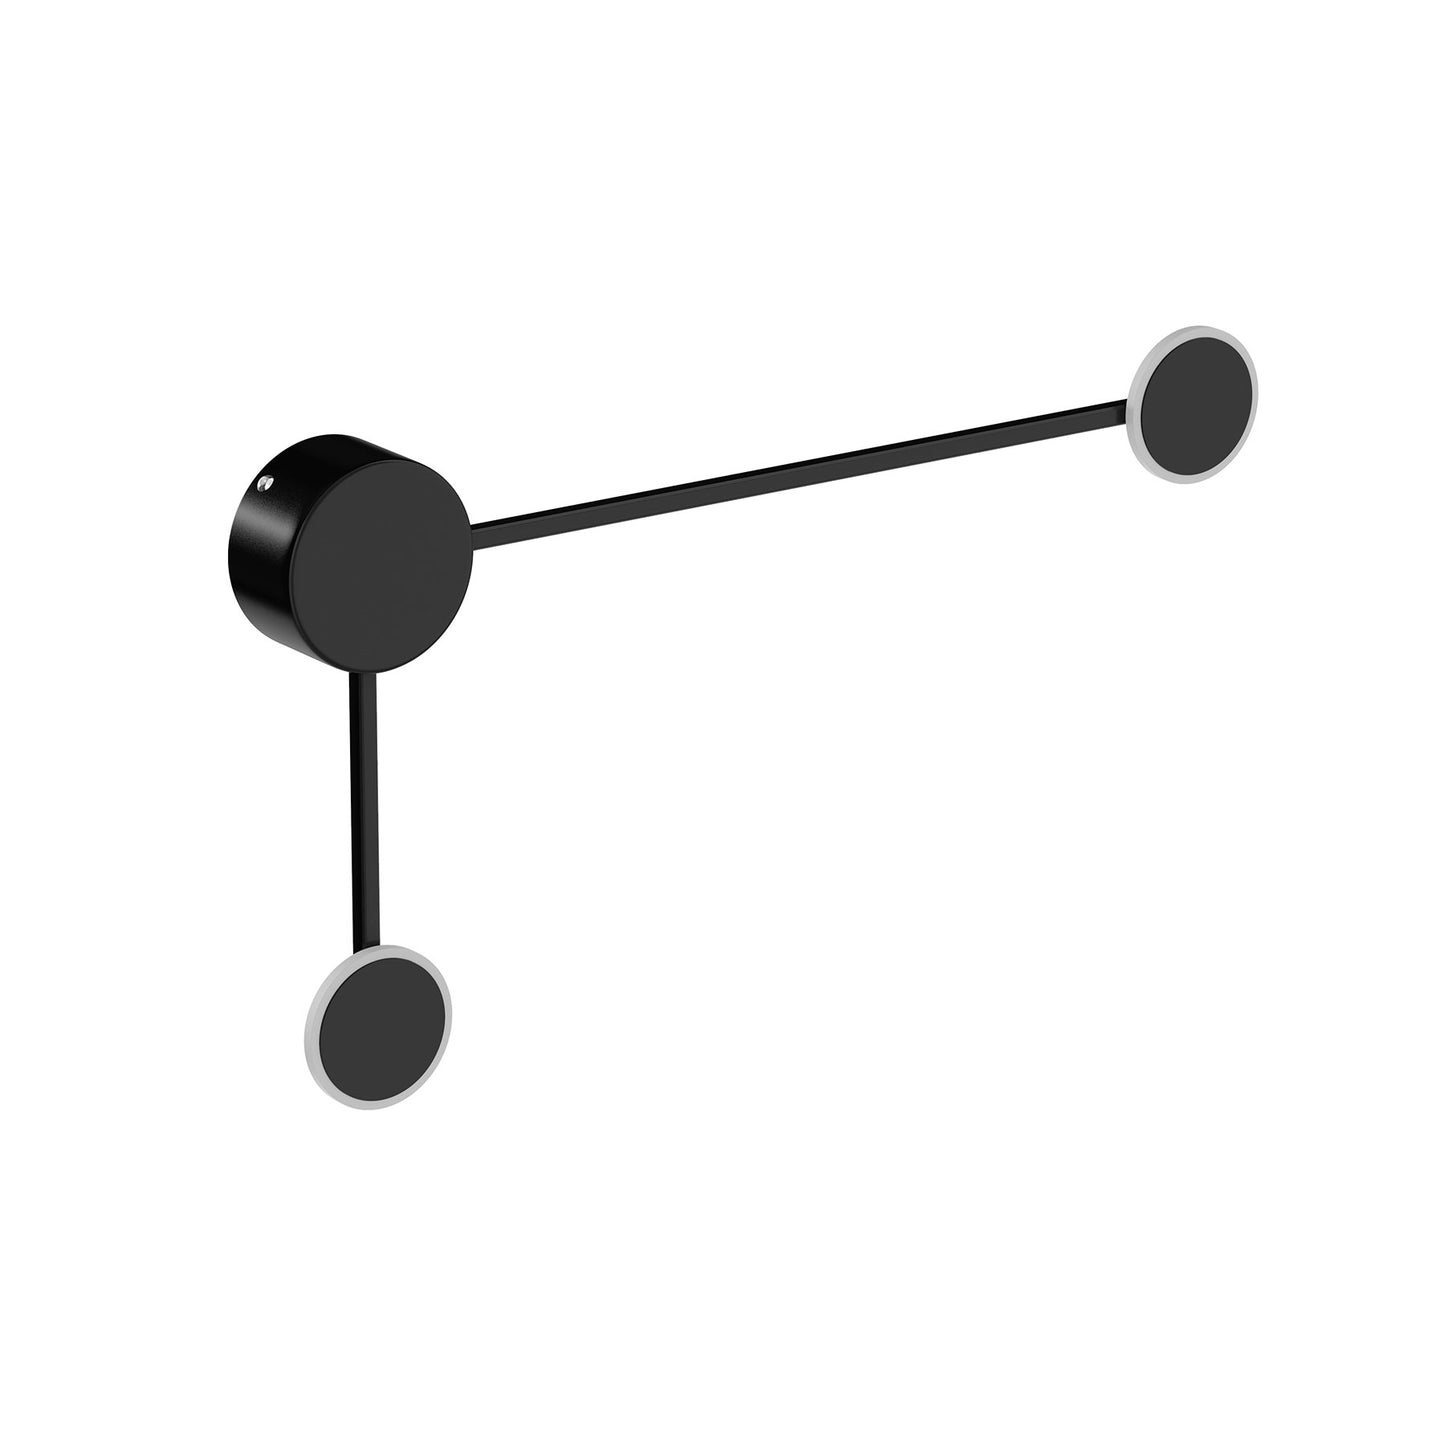 integrated-led-wall-sconces-lights-6w-head-3000k-black-wall-sconces-lighting